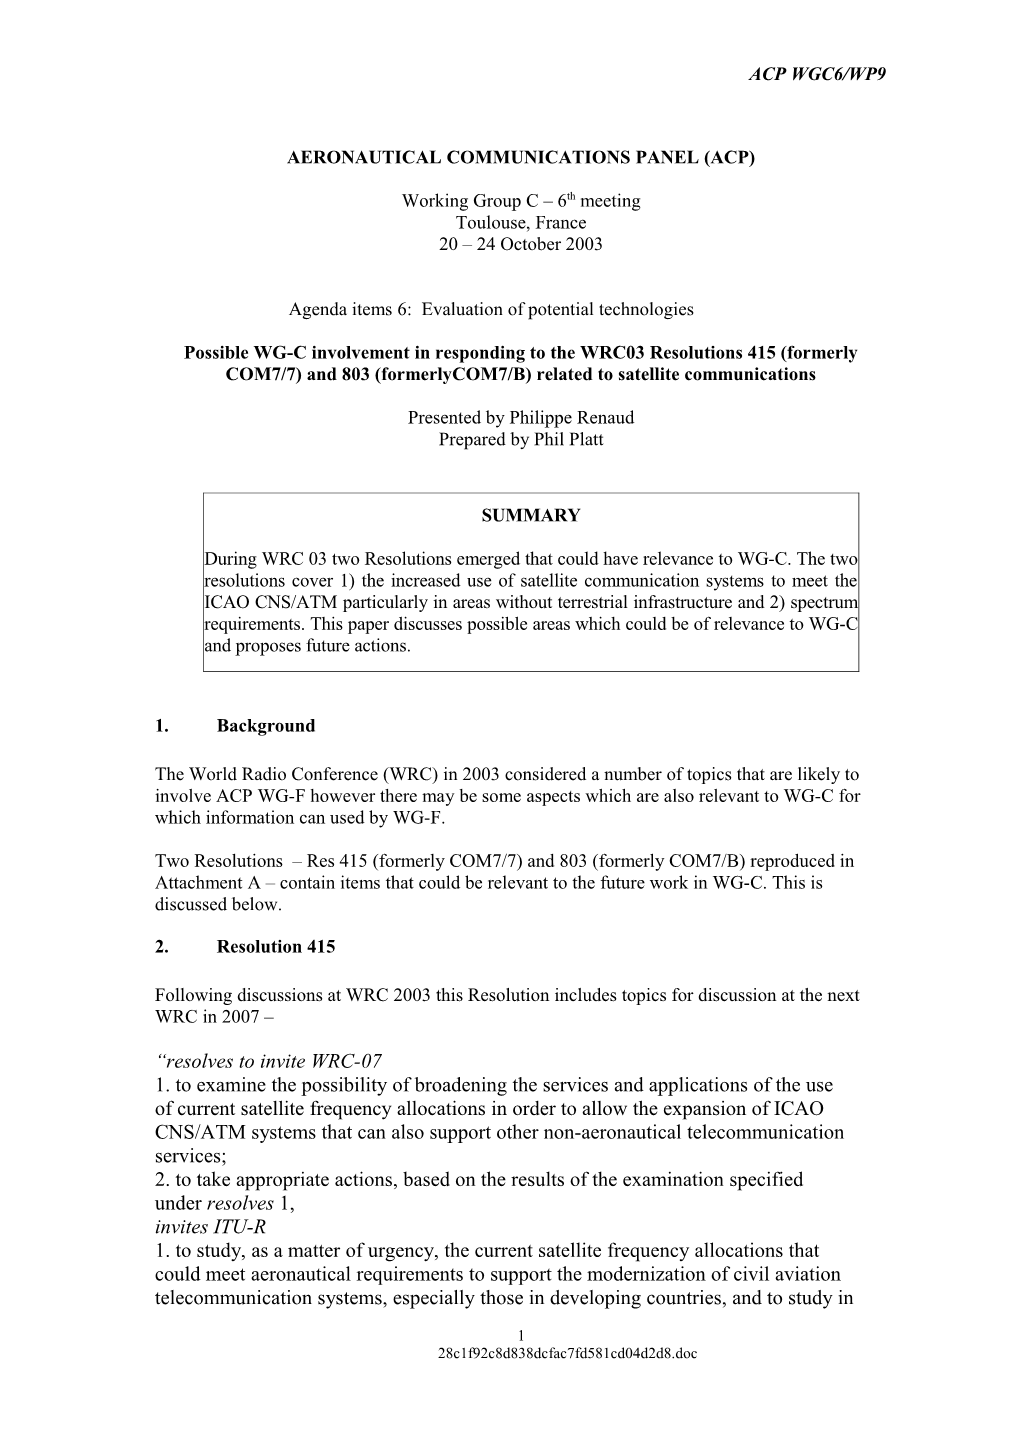 Possible WG-C Involvement in Responding to the WRC03 Resolutions 415 (Formerly COM7/7)